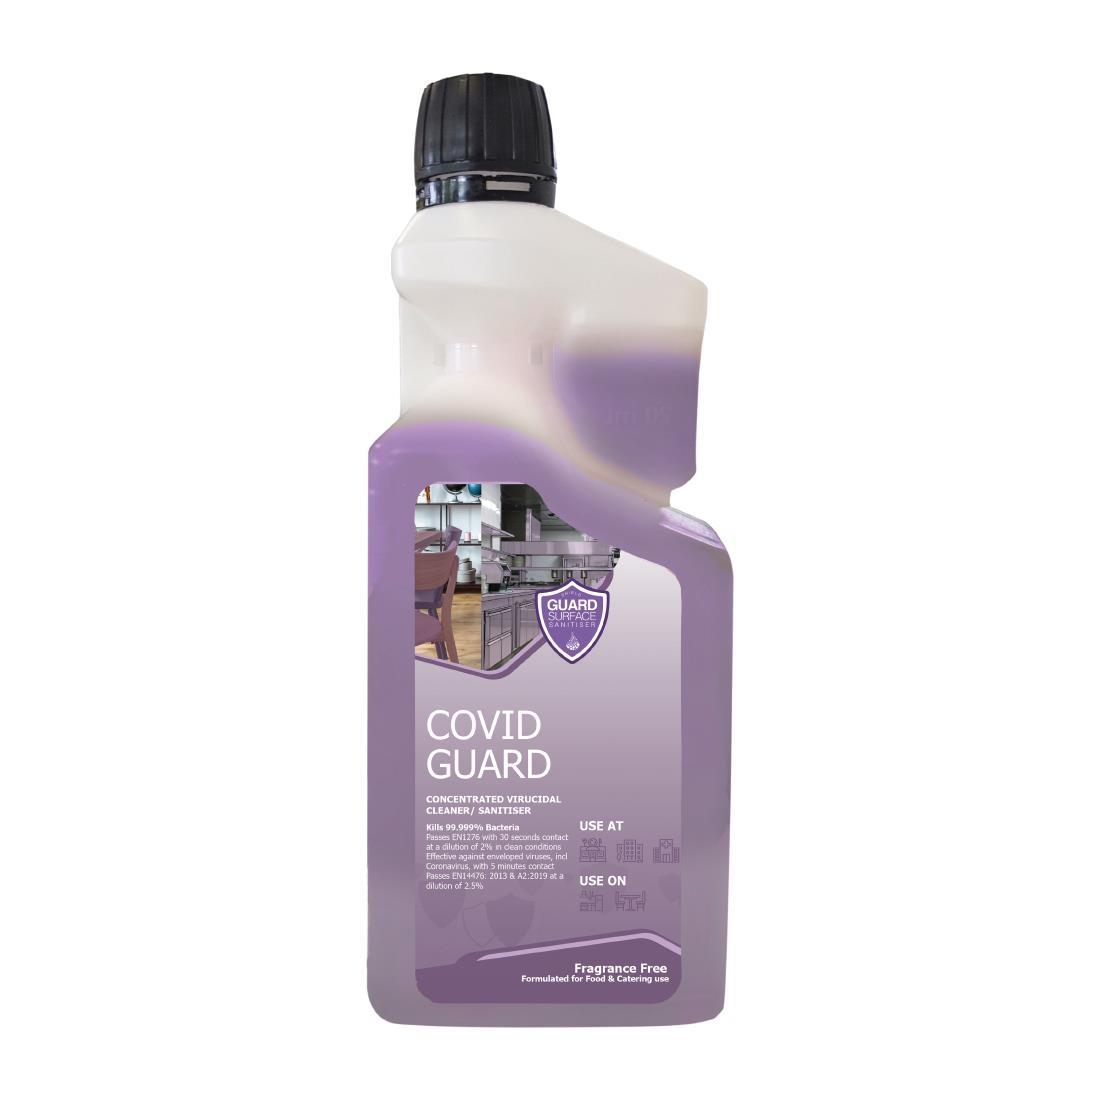 Covid Guard Virucidal Fragrance Free Concentrate 6 x 1Ltr - FR181  - 1